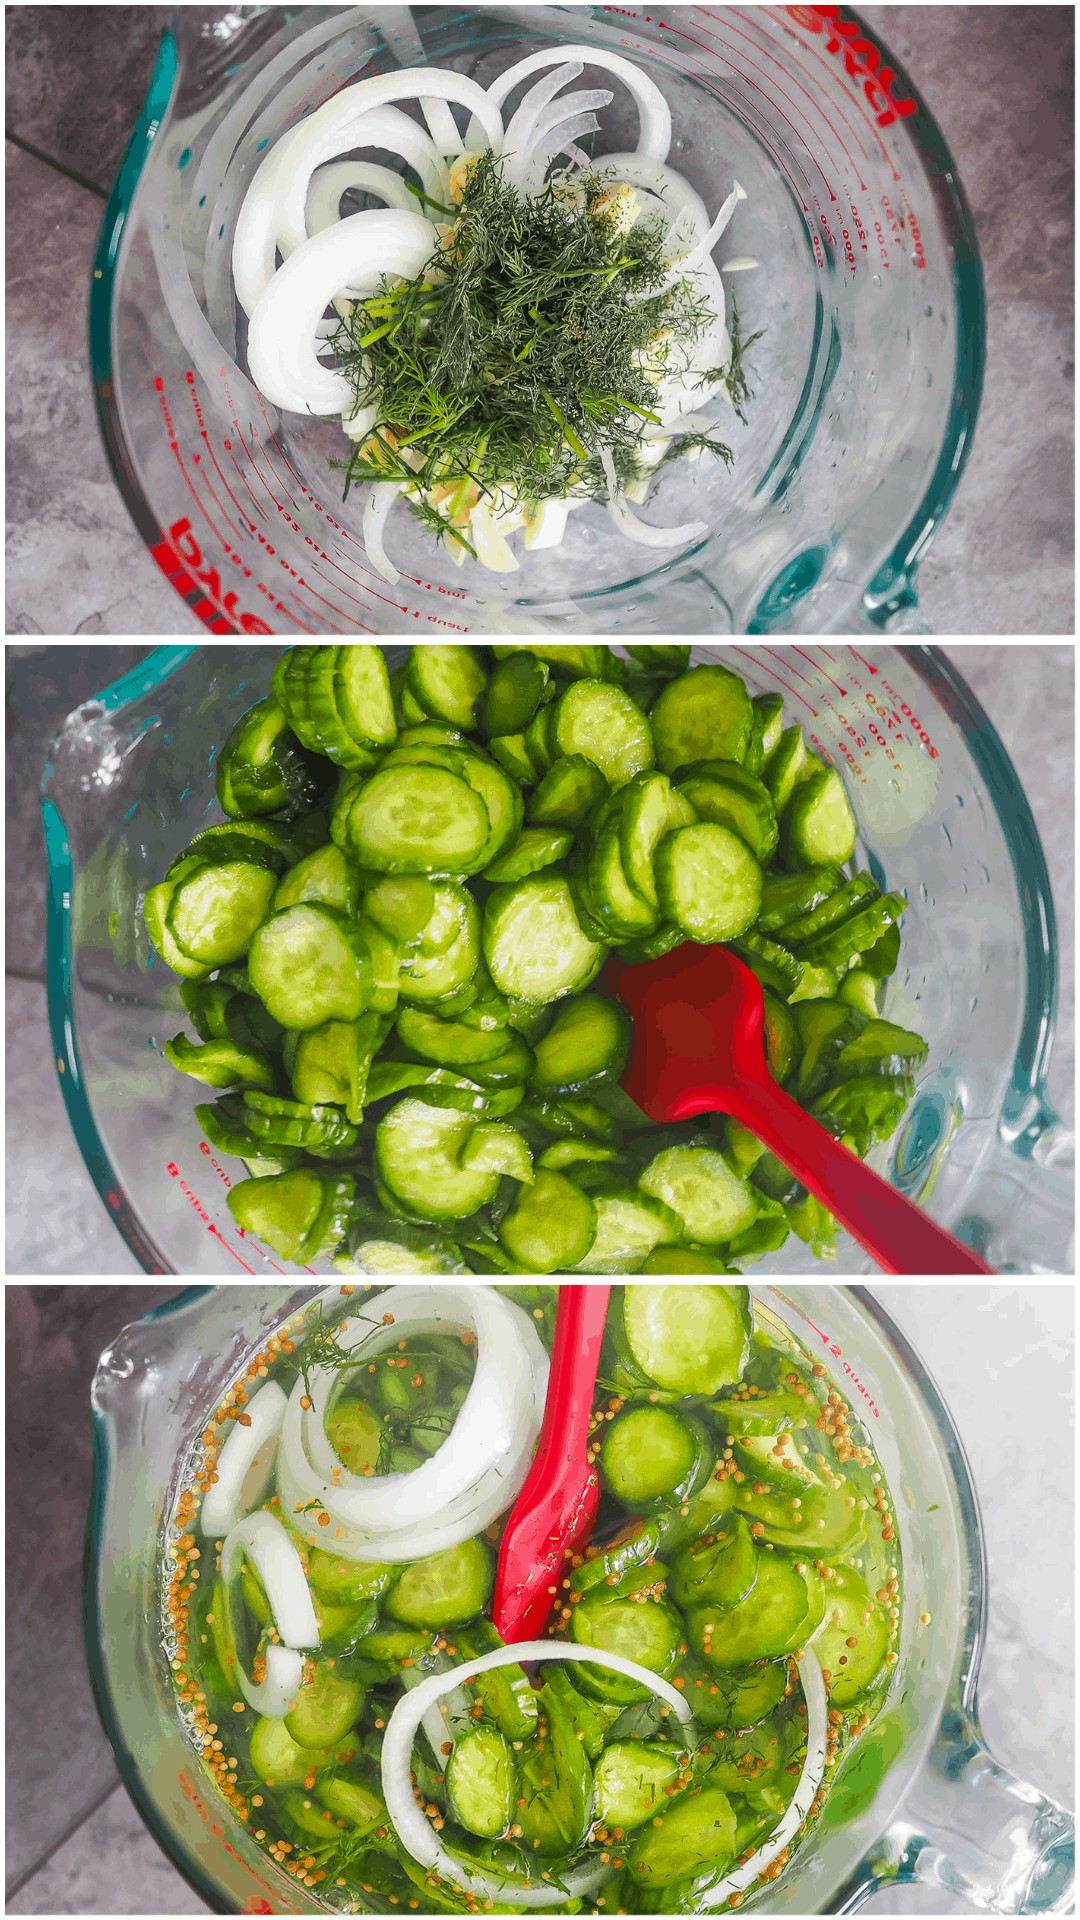 A collage of images showing how to make dill pickles.